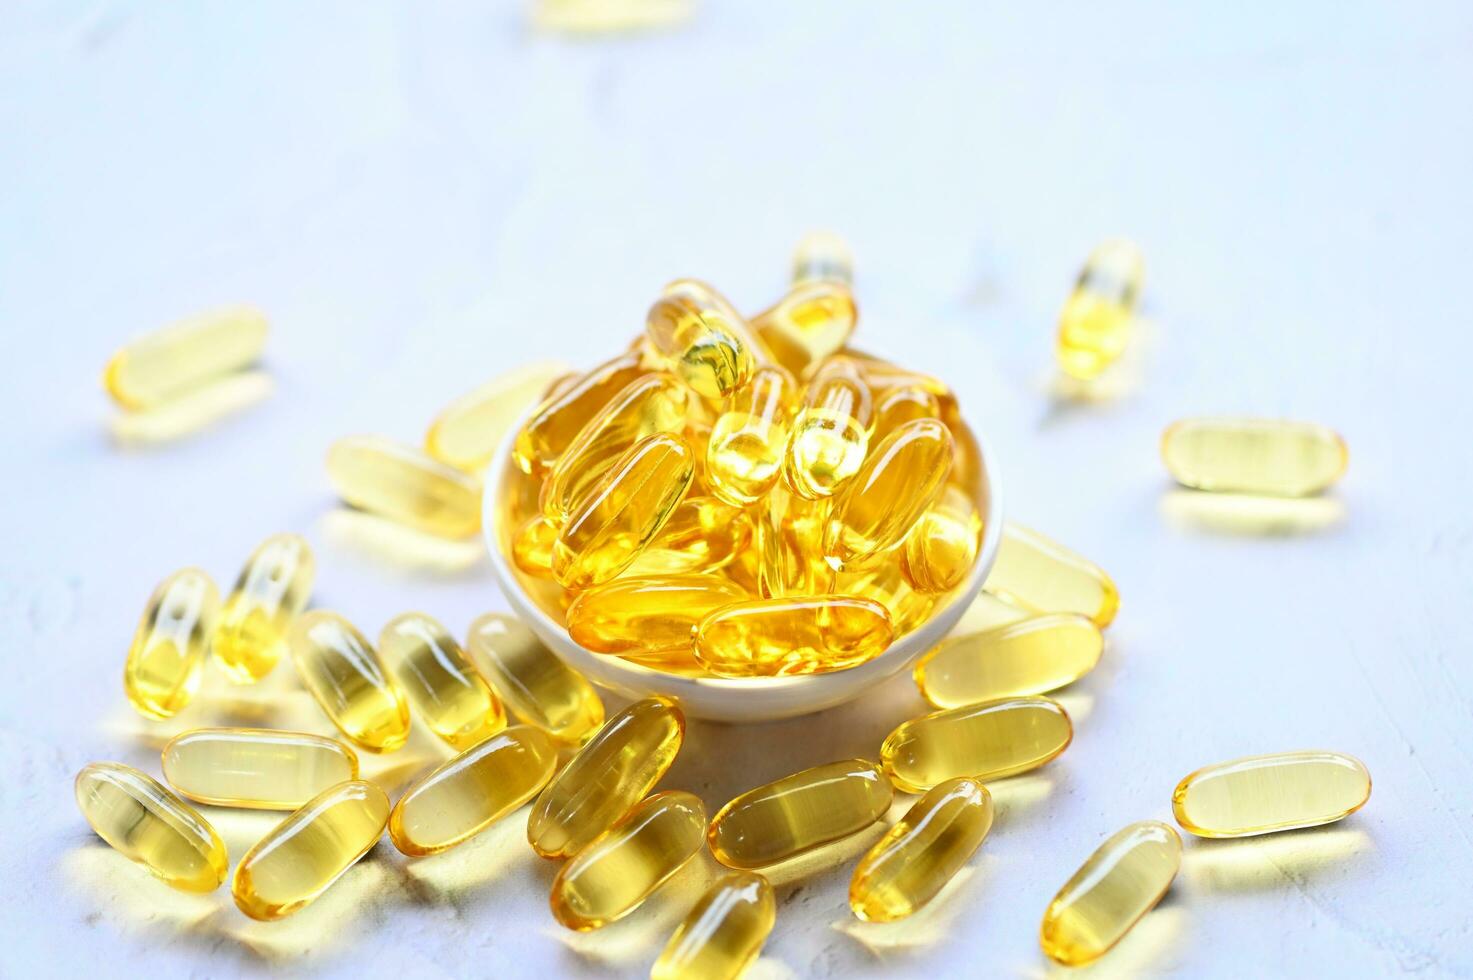 Fish oil capsules with omega 3 and vitamin D Cod liver oil omega 3 gel capsules, healthy diet concept photo